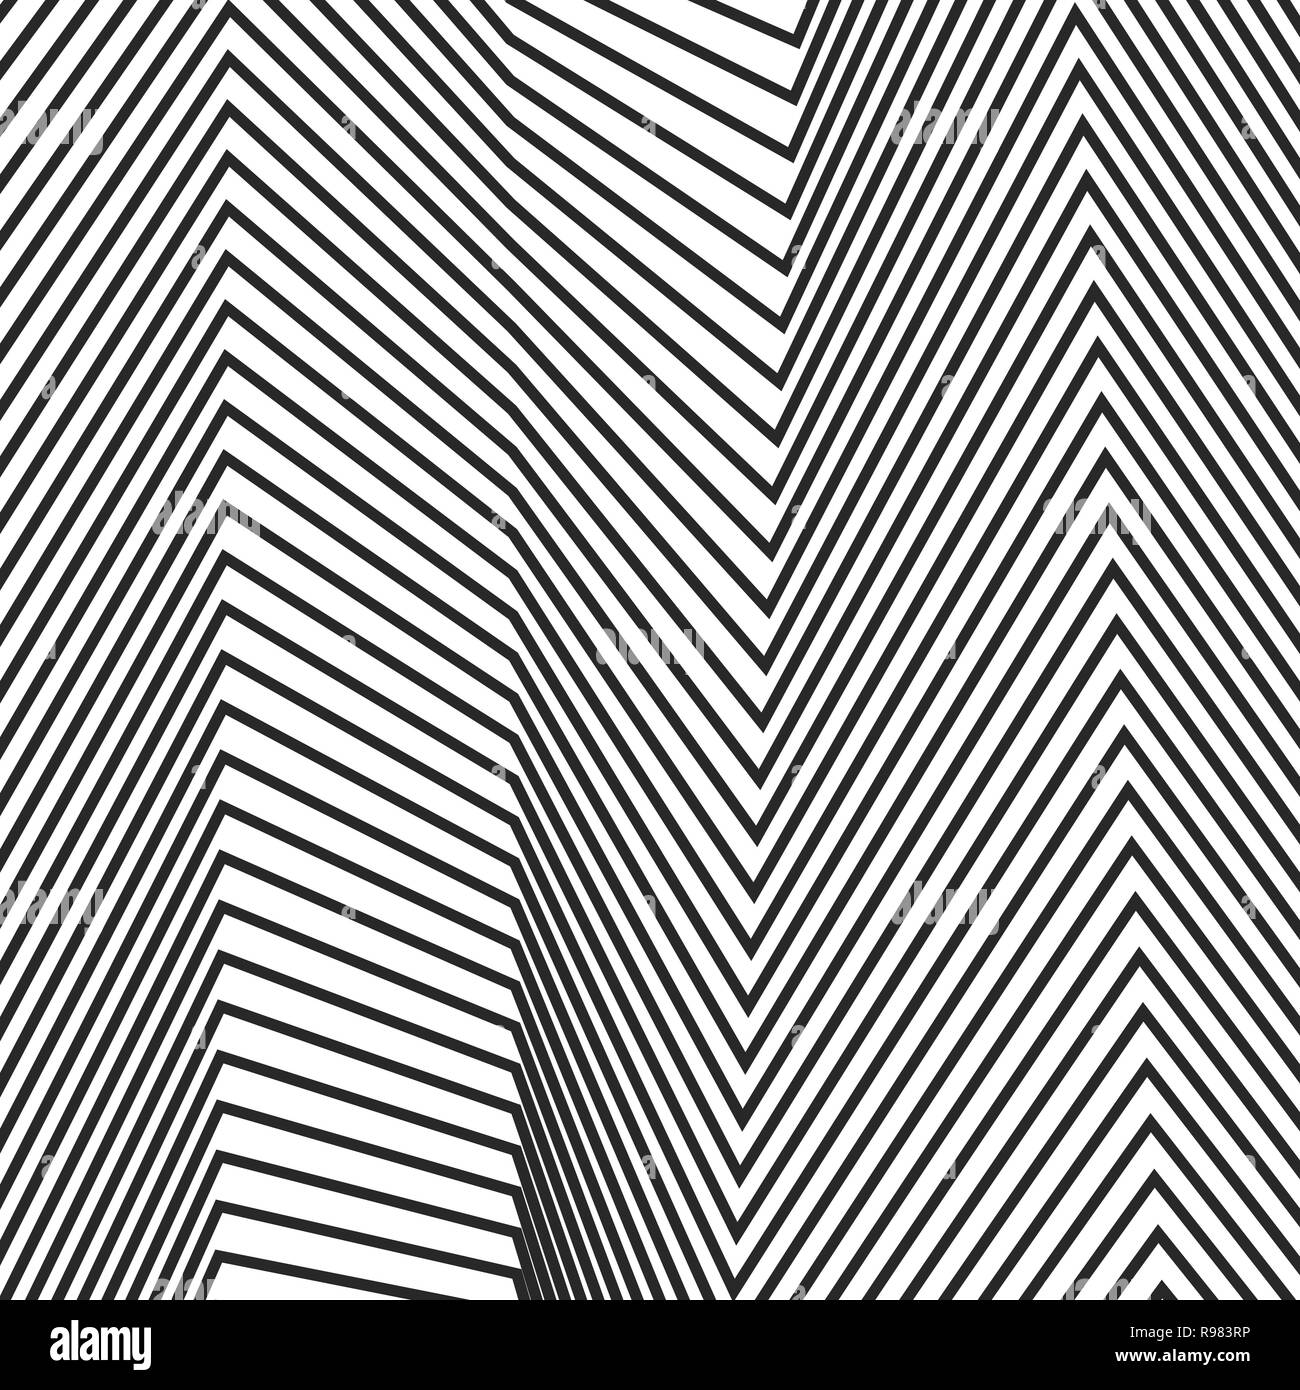 Abstract linear pattern. Vector illustration. Background with black lines Stock Vector